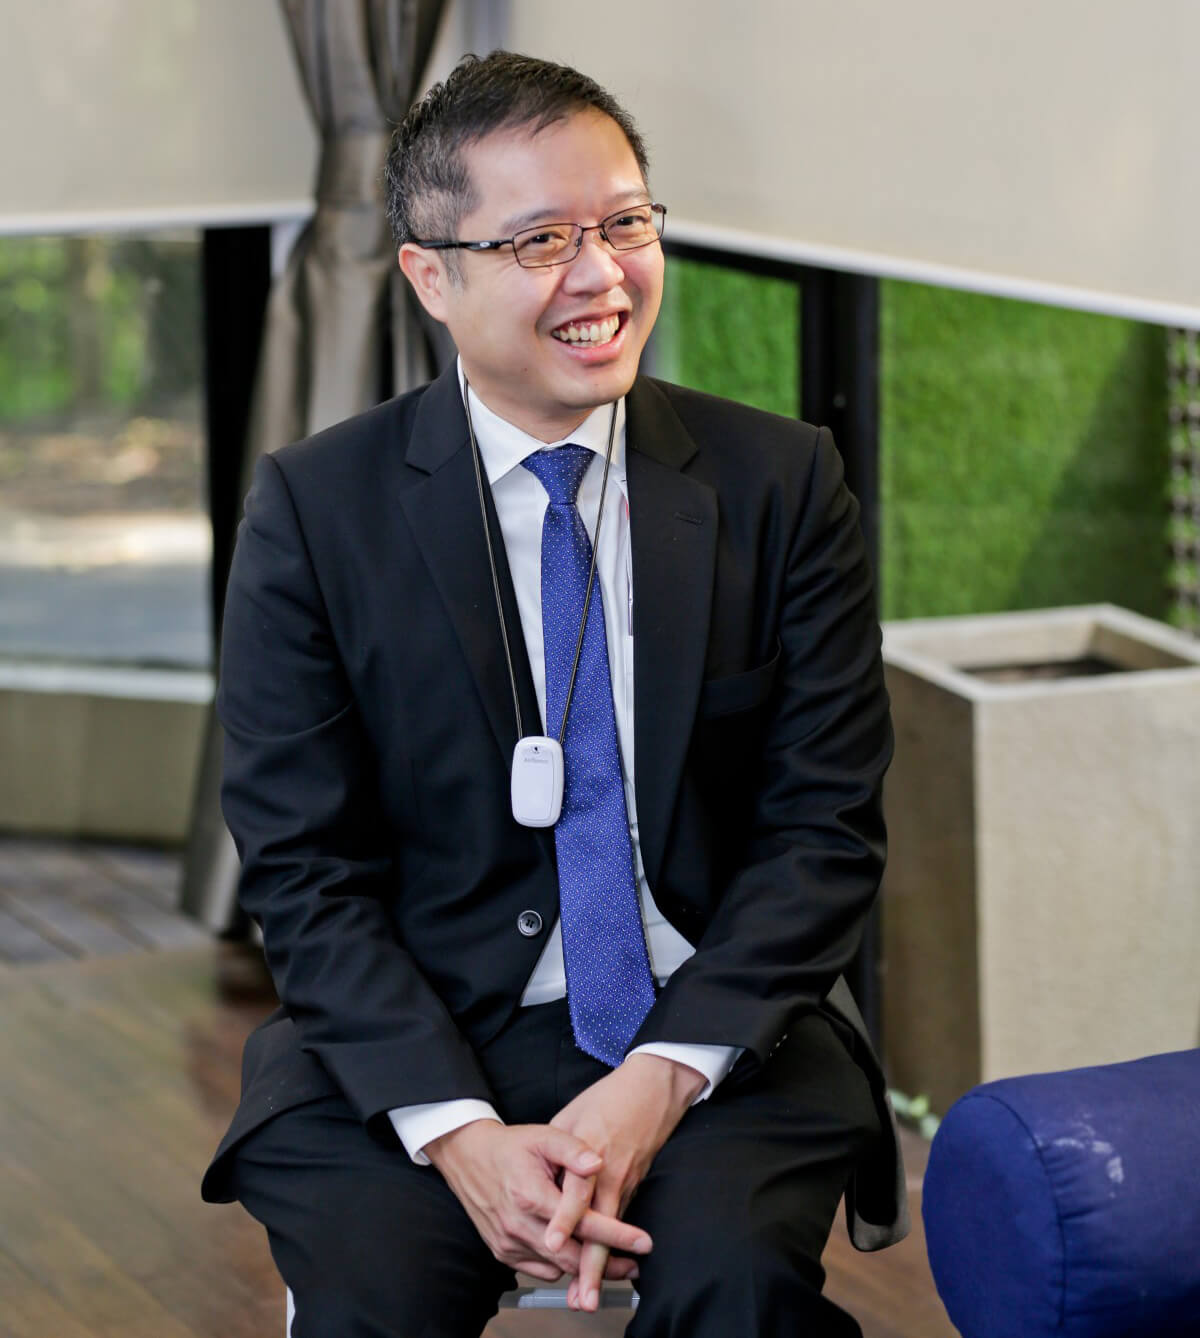 Sunway Group chief executive officer of digital and strategic investment Evan Cheah is confident that the partnership will augur well with Sunway’s vision to position Sunway City Kuala Lumpur as a living lab and testbed to drive homegrown innovation for the betterment of the nation as a whole